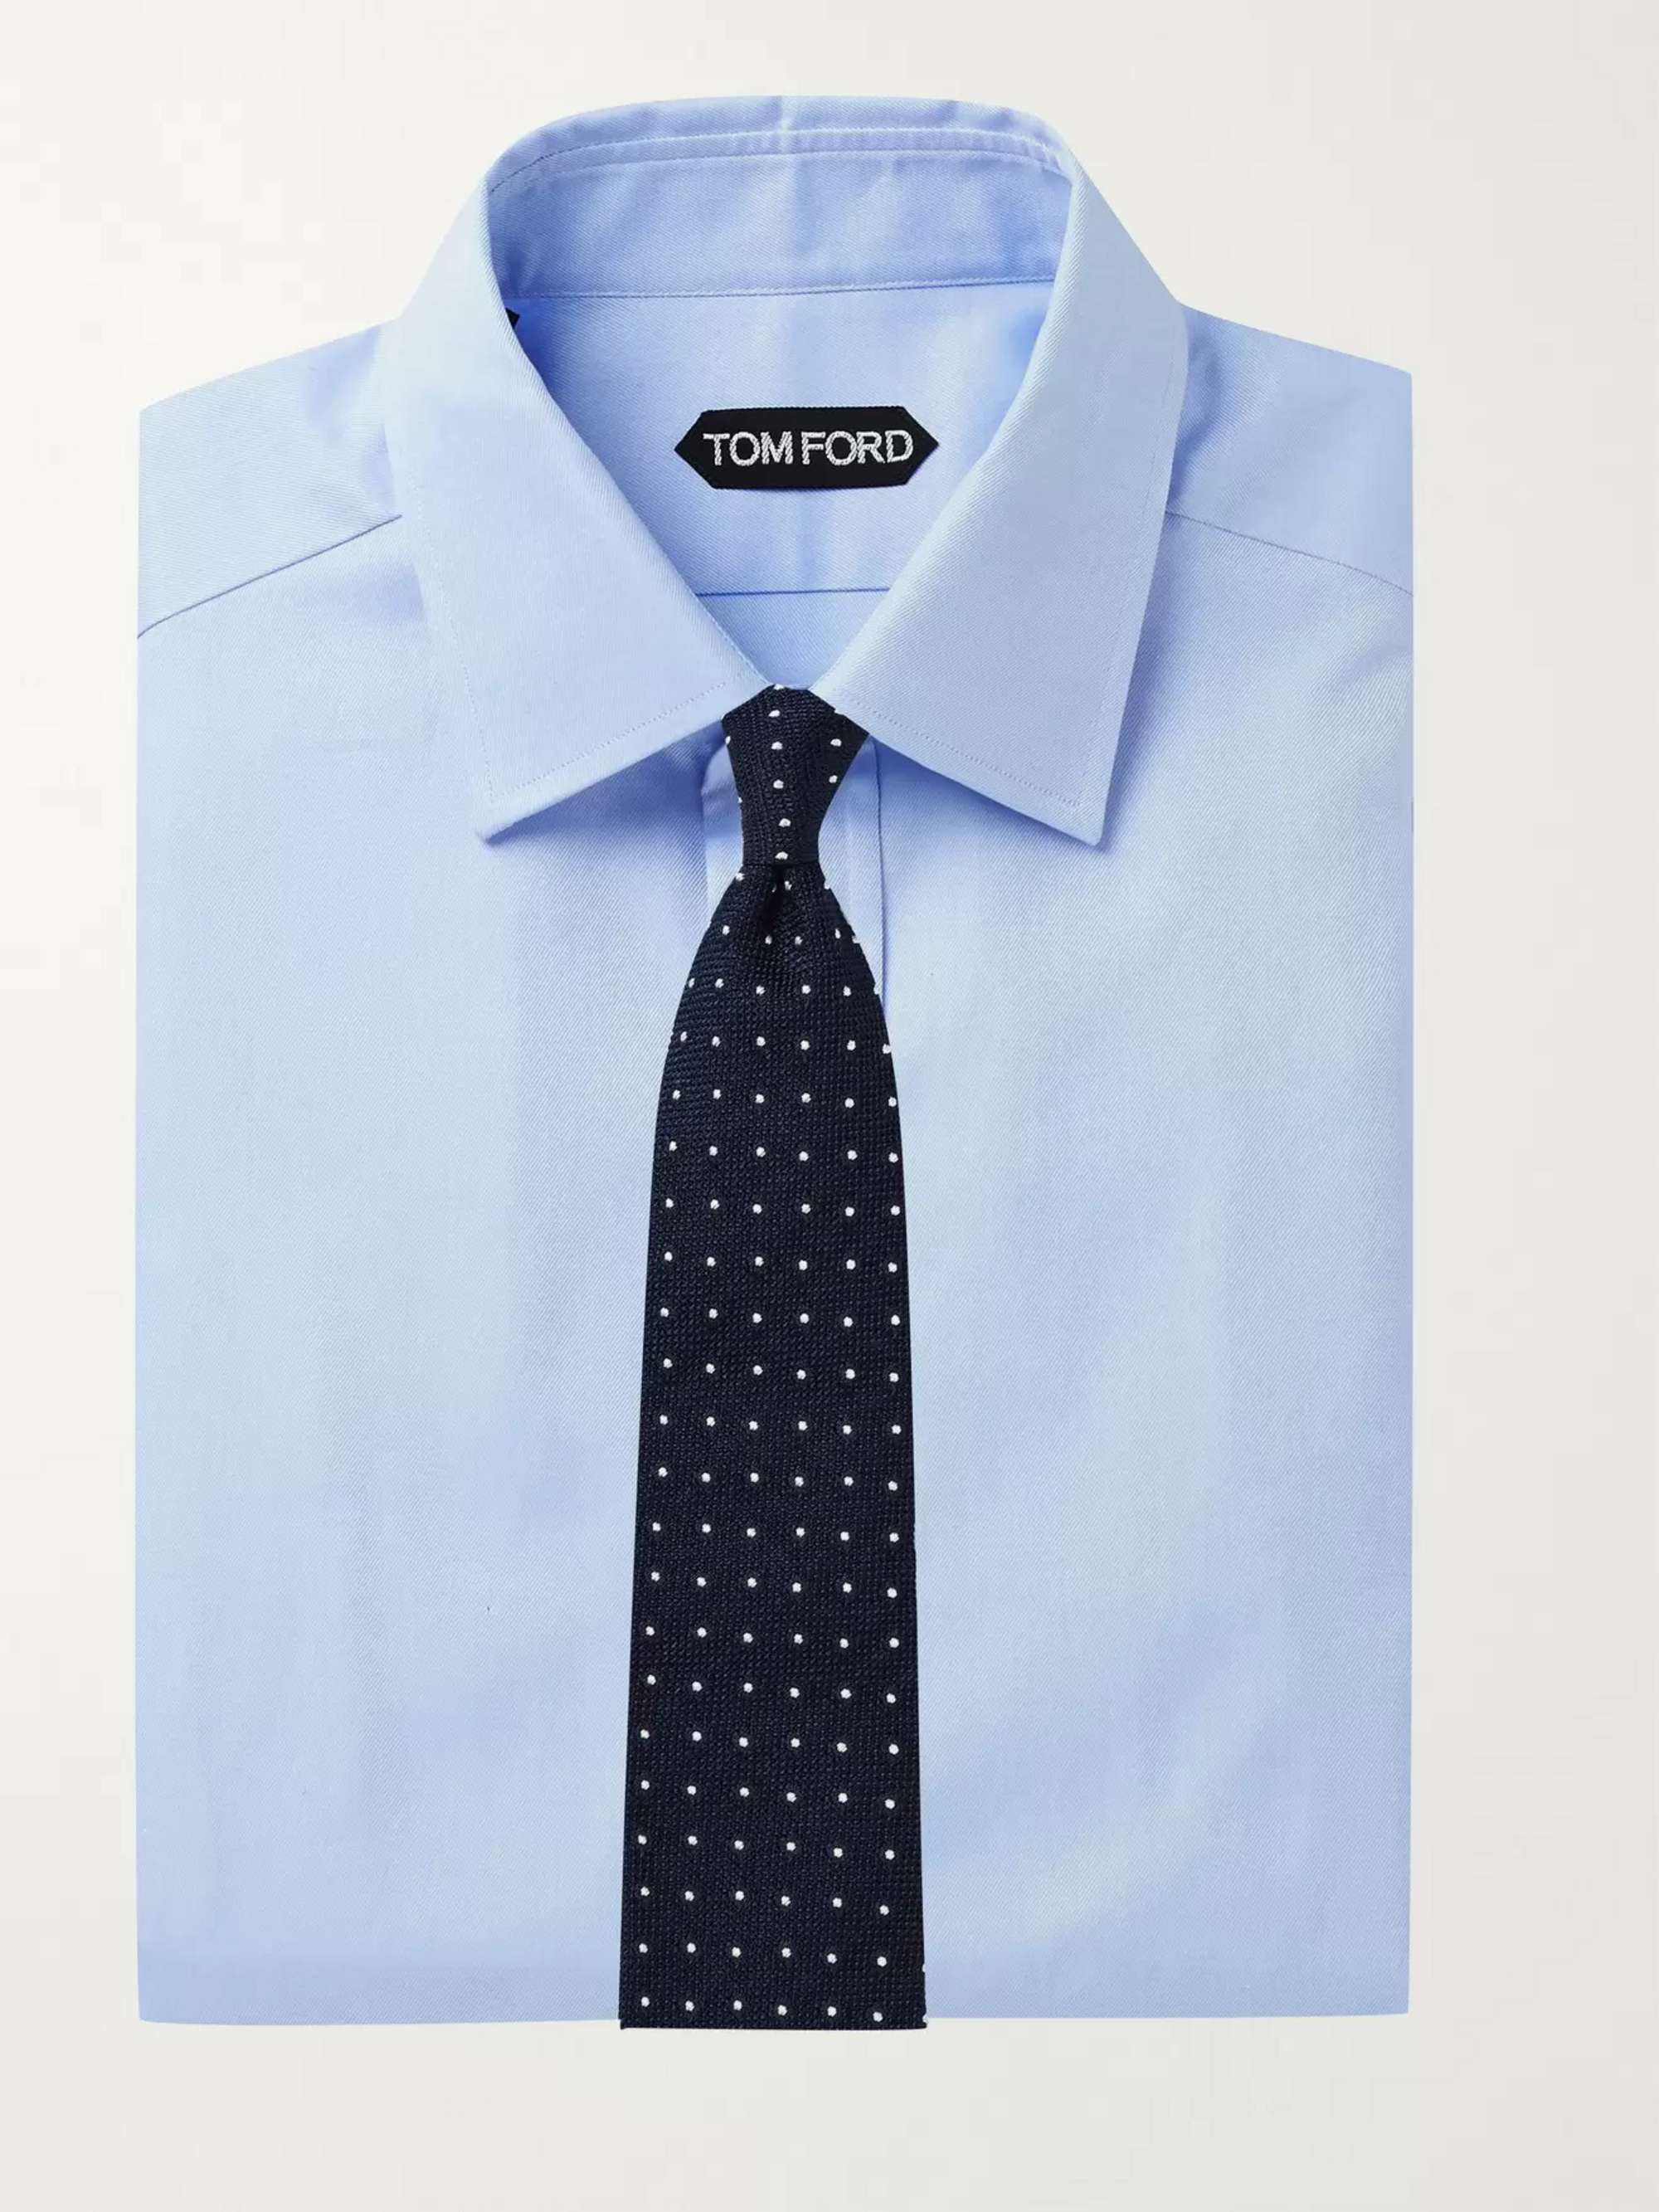 Tie to wear with light blue shirt